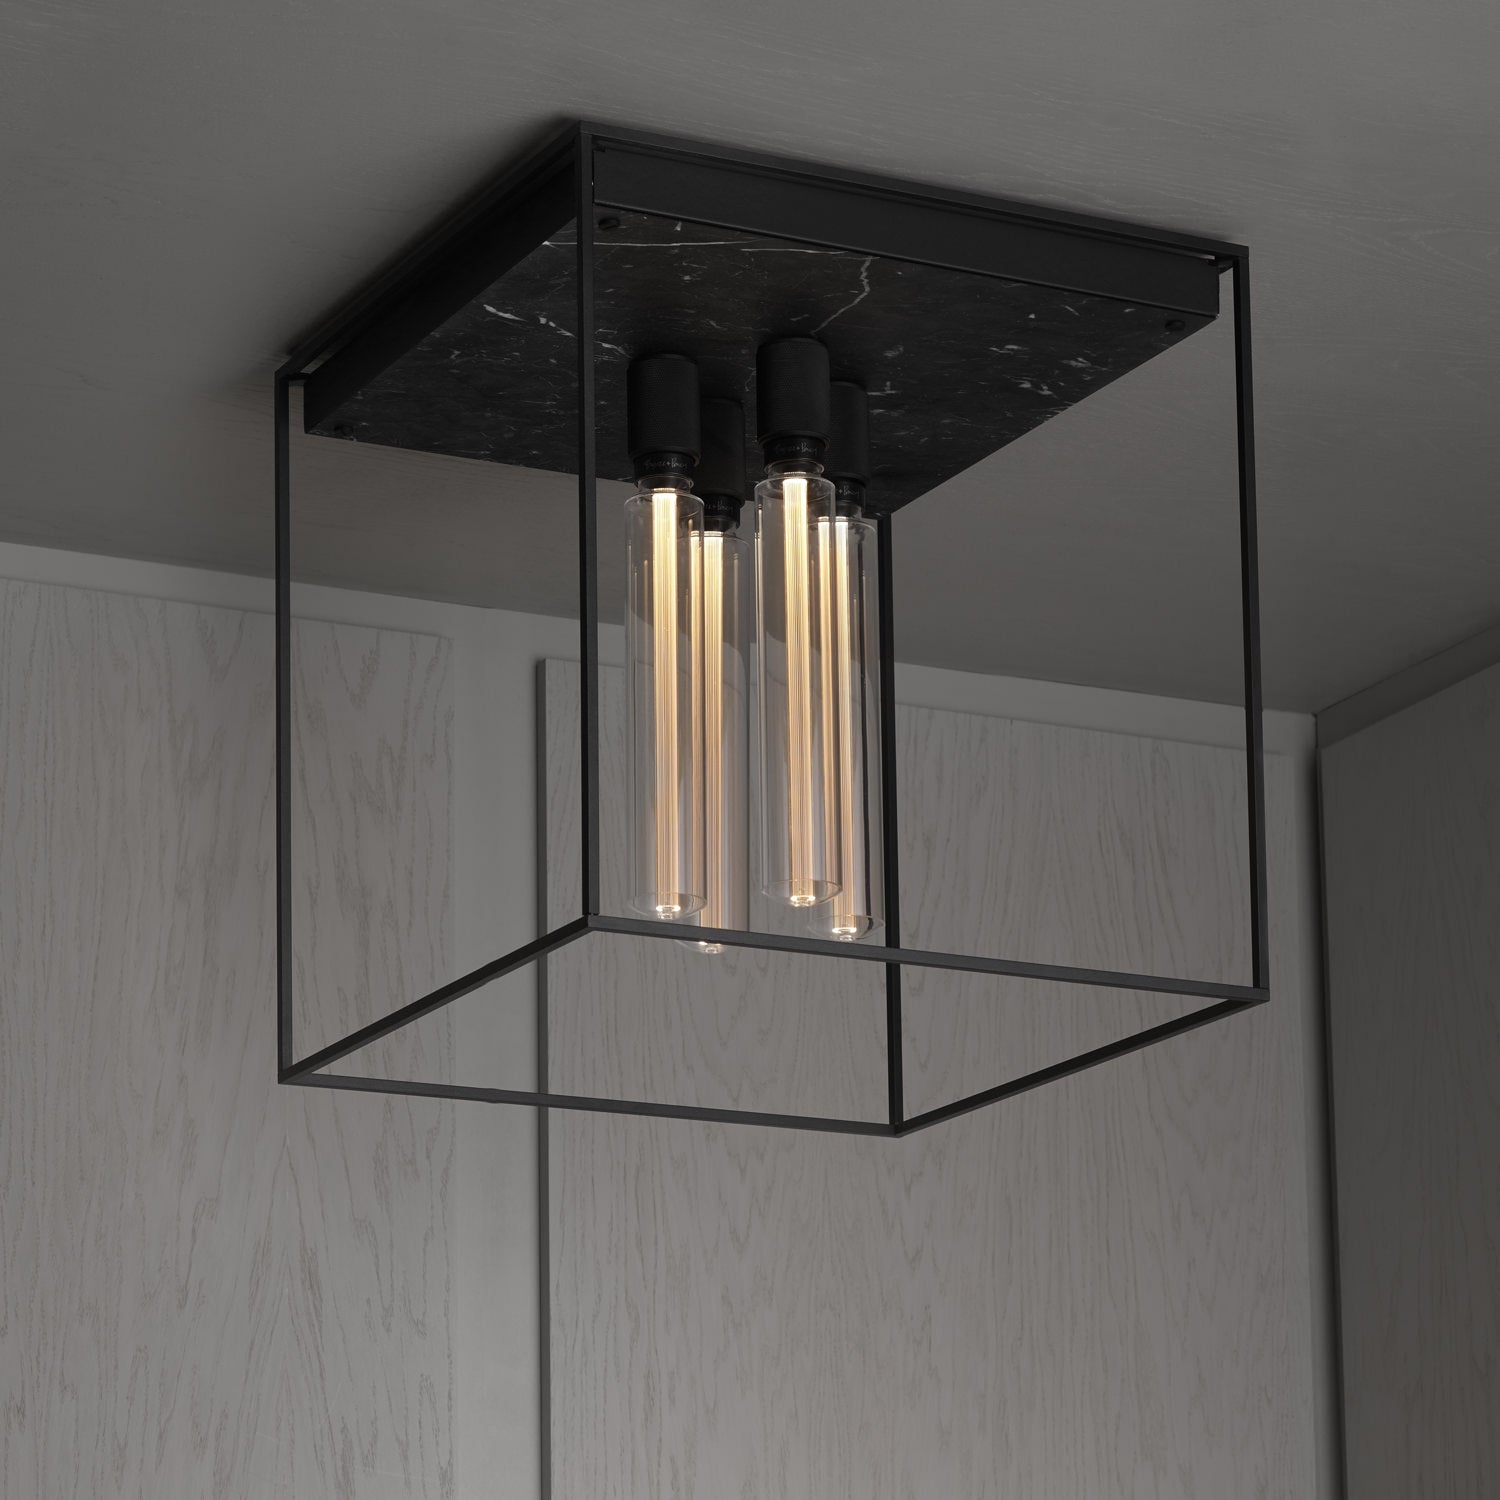 Buster + Punch - Caged Ceiling Light 4.0